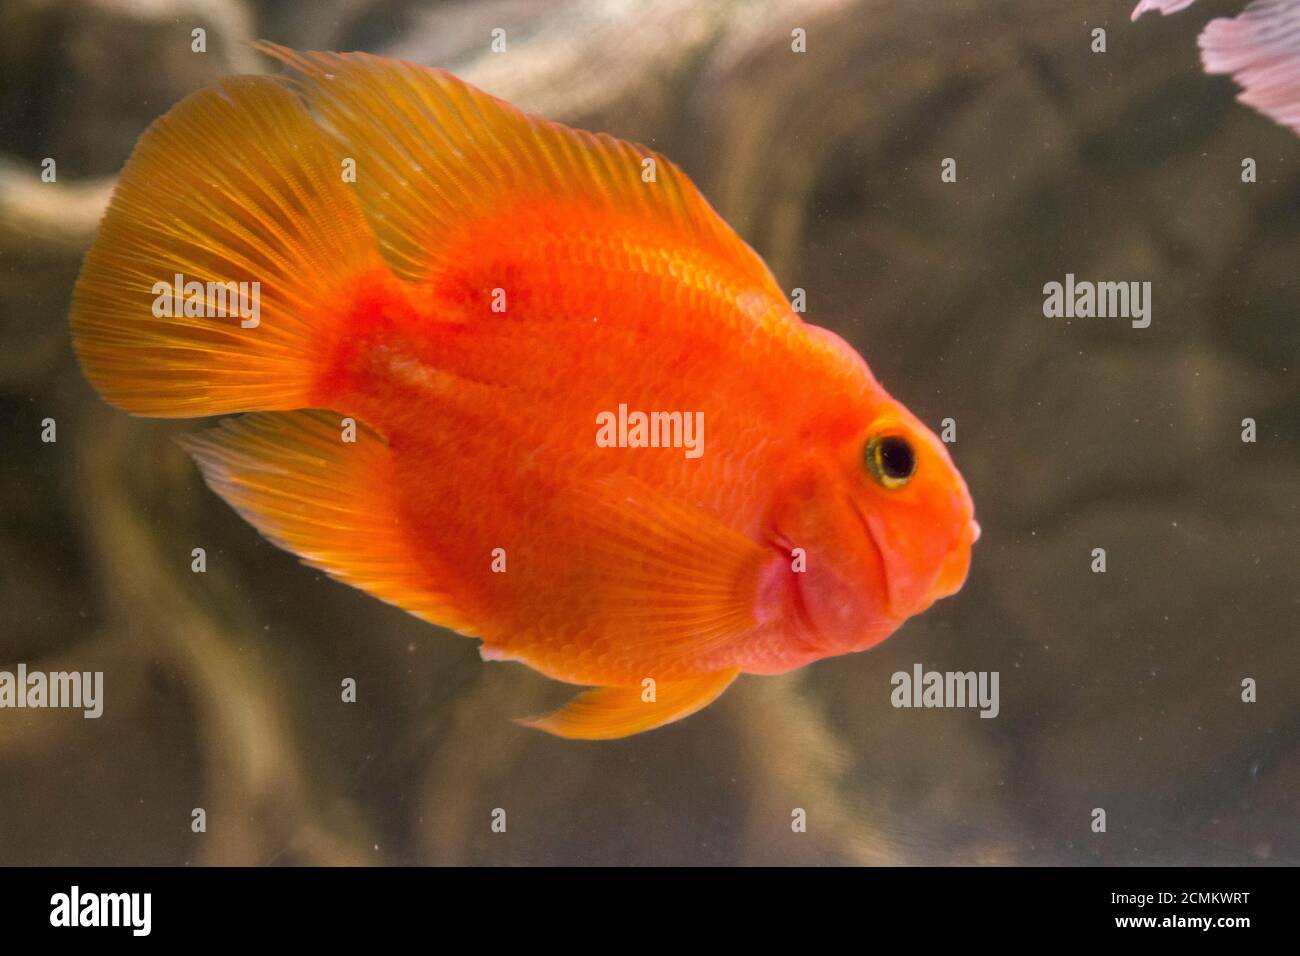 red parrot fish freshwater parrot. High quality photo Stock Photo - Alamy